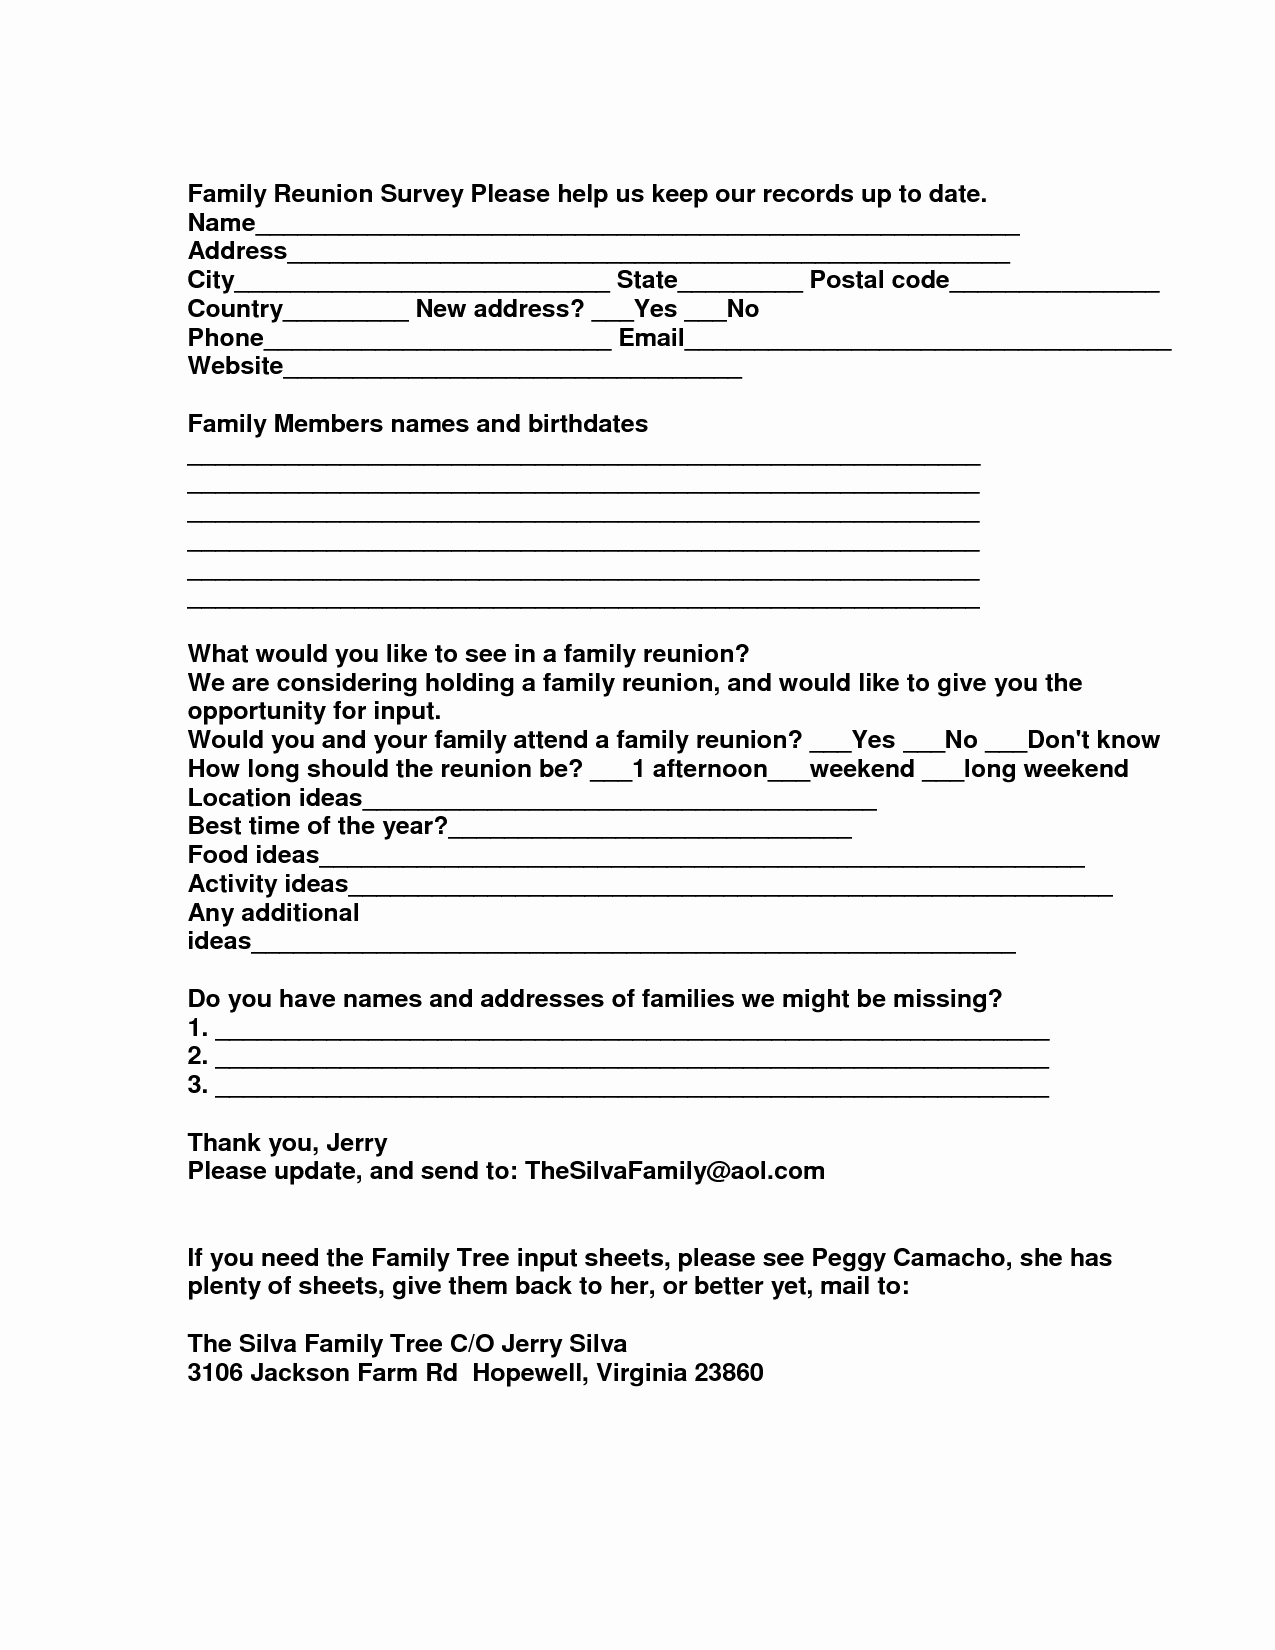 Family Reunion Letter Templates Best Of Family Reunion Food Ideas